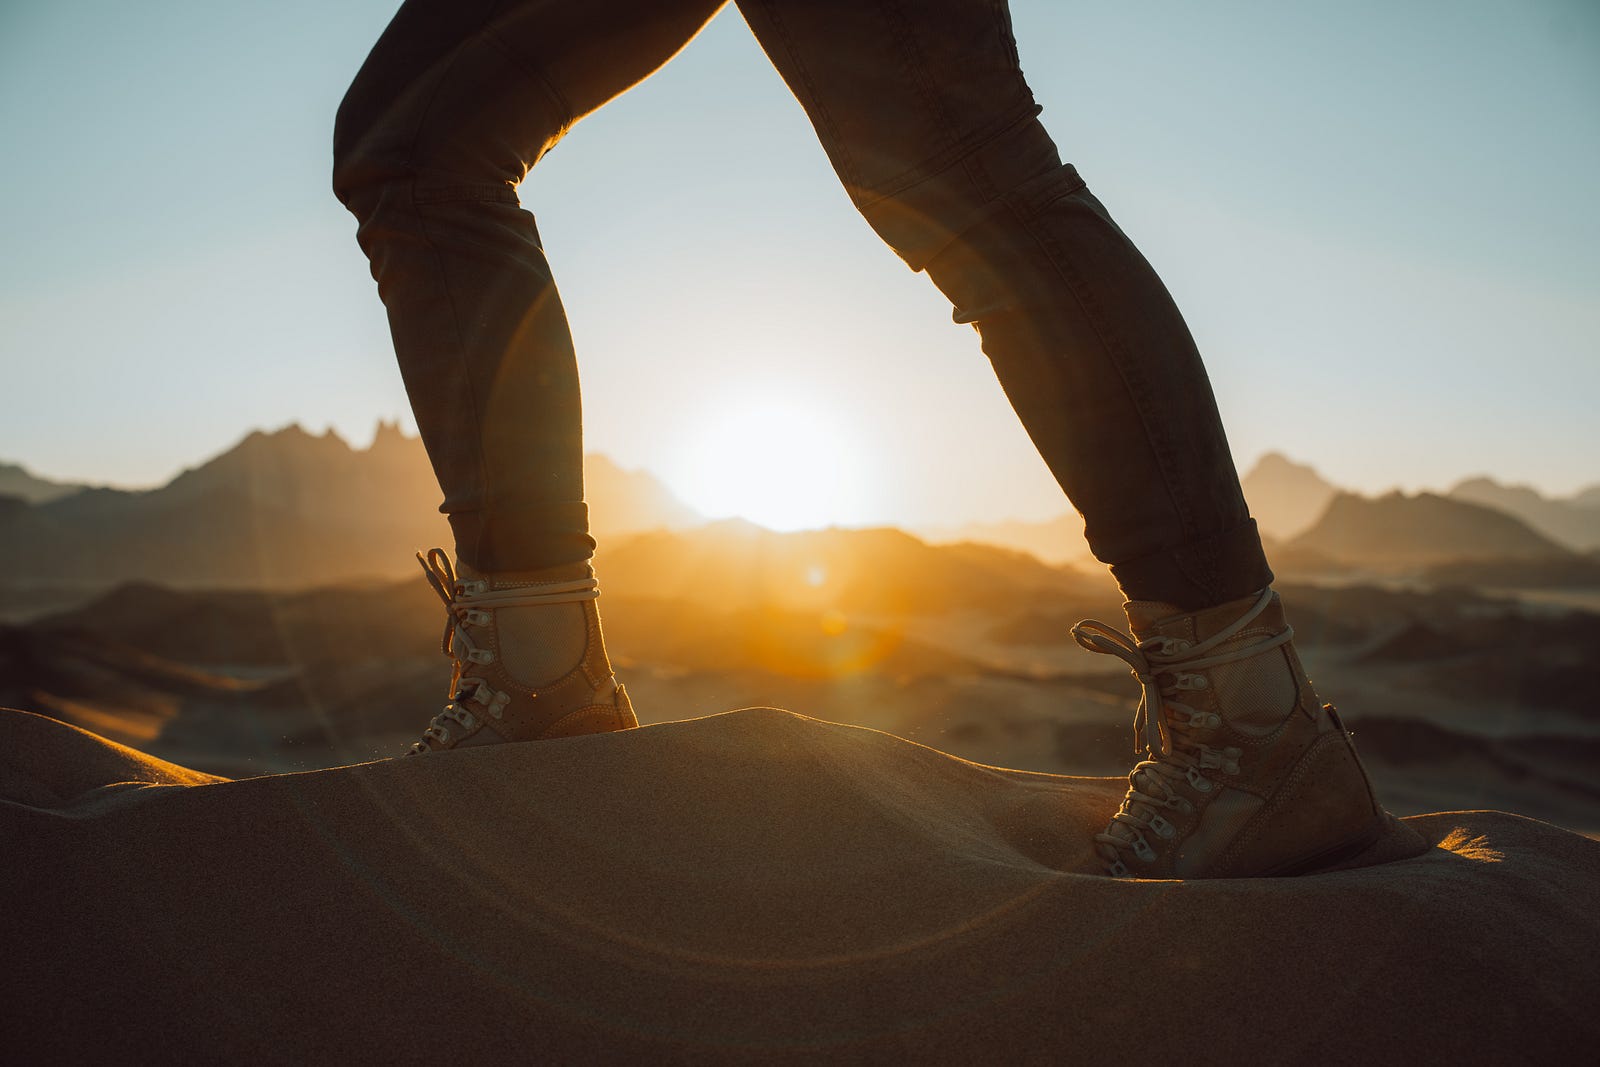 We see a person (from mid-thigh down) walking on sand at sunsrise. Incorporating some bodyweight activities can lead to a more challenging workout. Alternative terrains (such as a beach) can introduce more challenges, too.